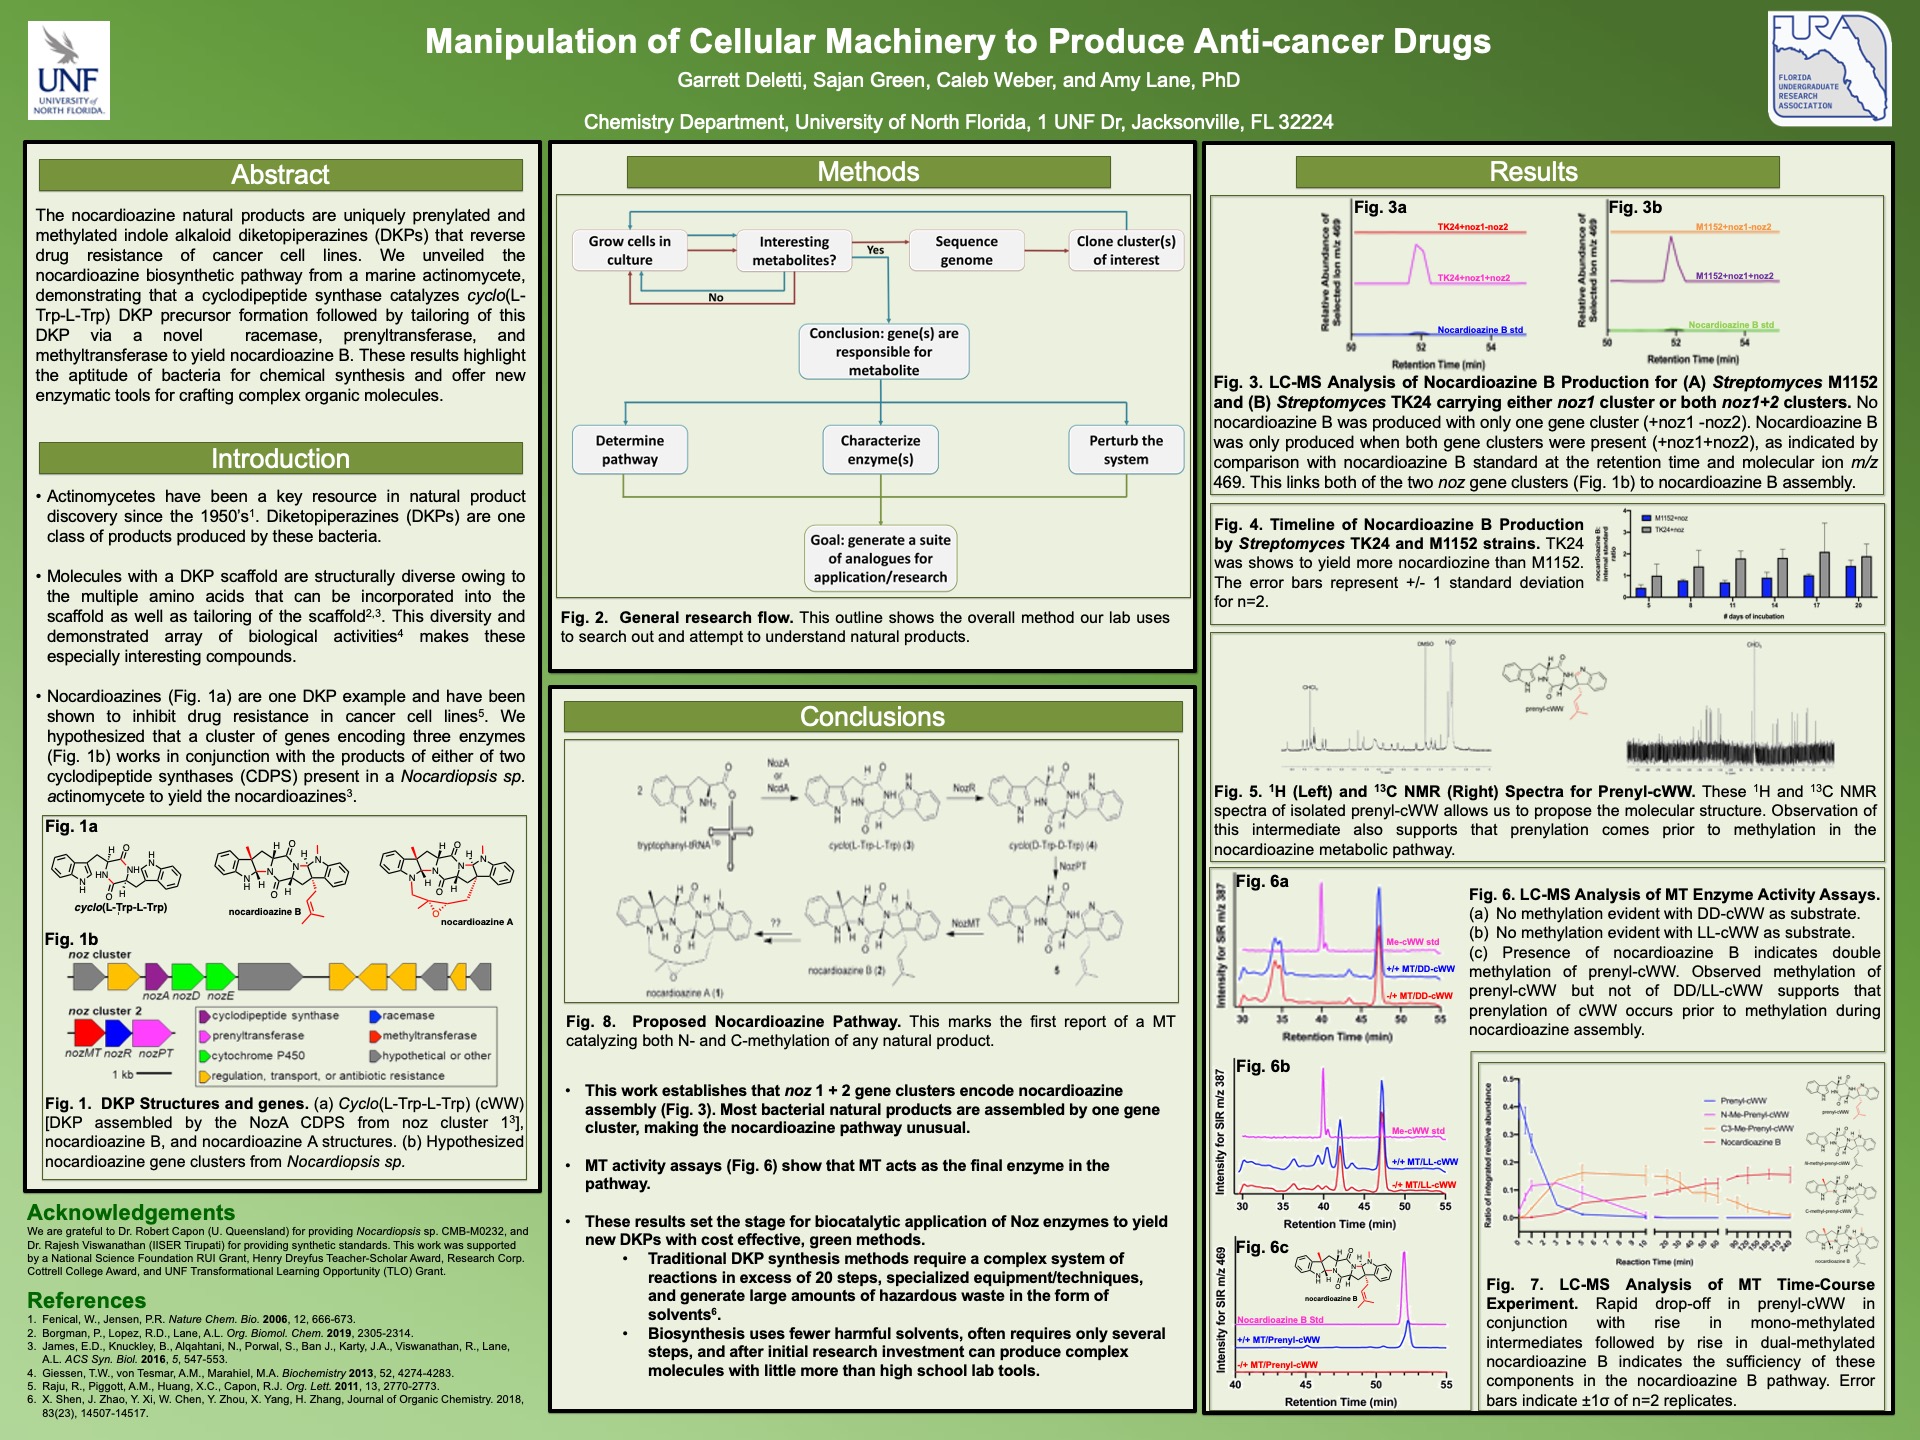 Manipulation of Cellular Machinery to Produce Anti-cancer Drugs poster